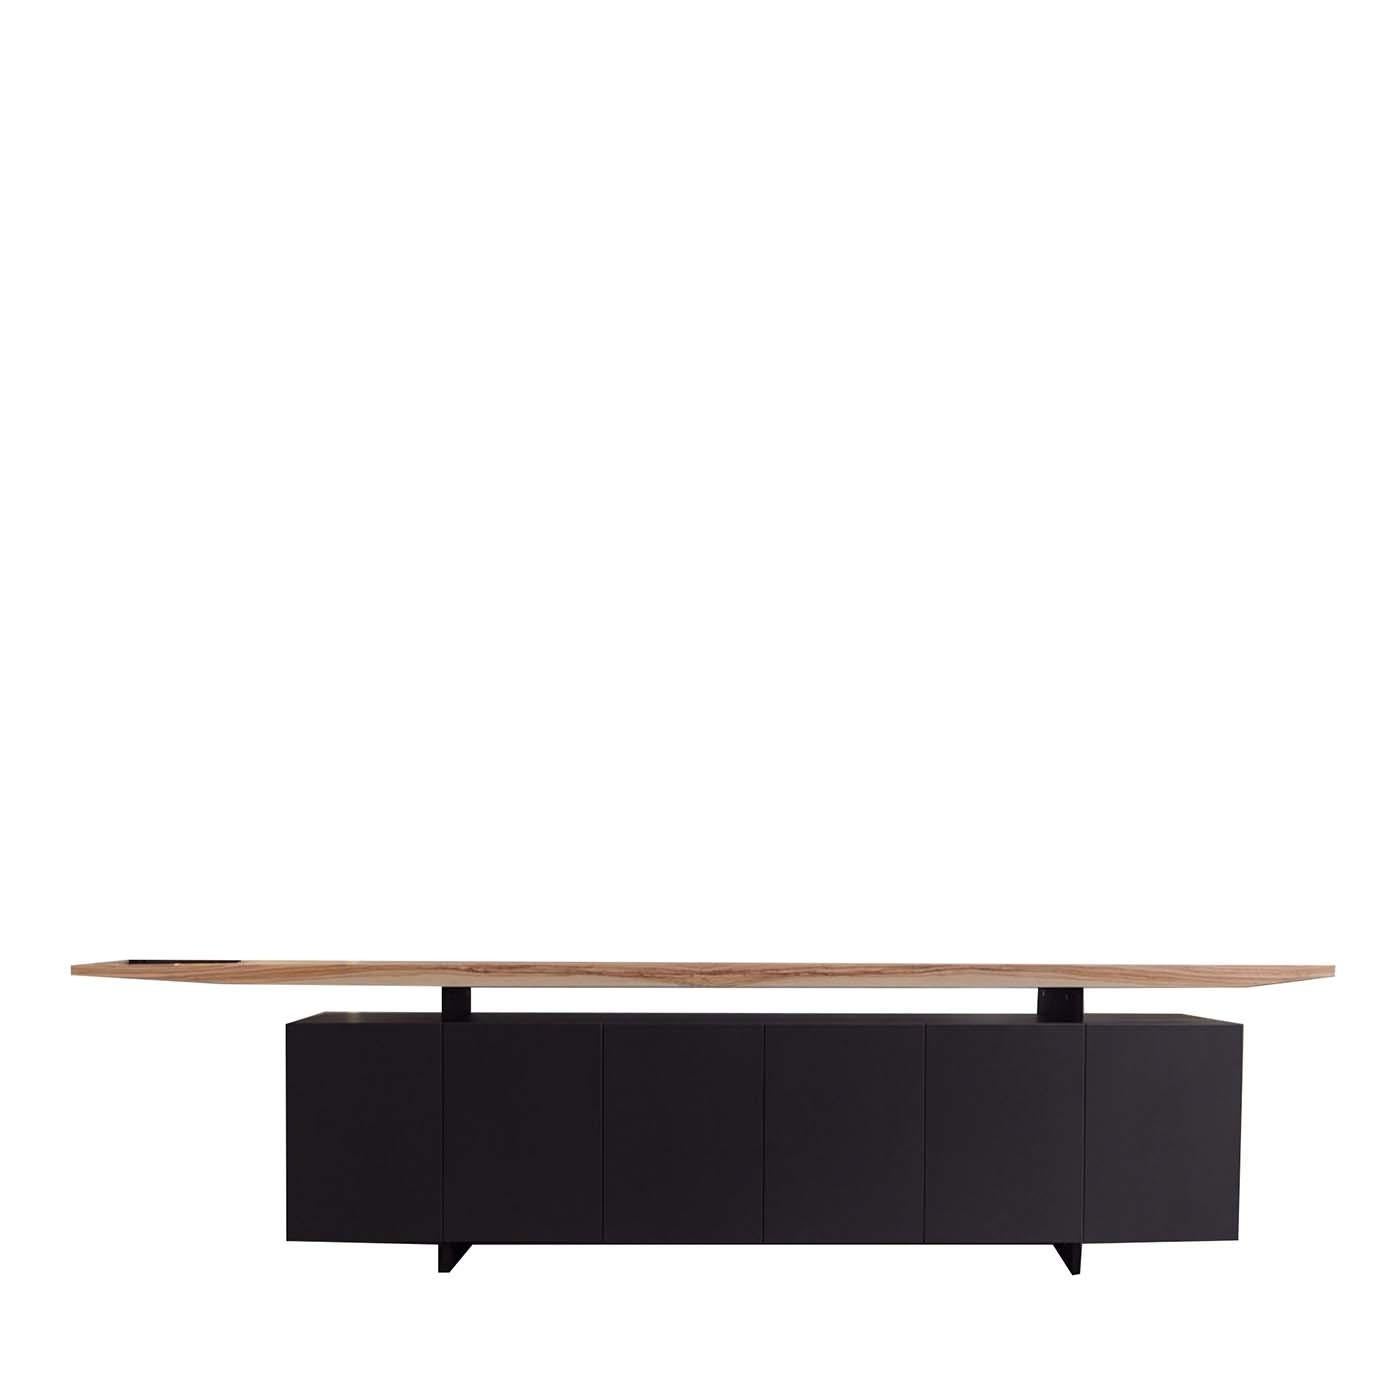 This Minimalist, elegant, lacquered wooden sideboard with hinged doors features a light olive wood top that seems to take flight over the solidity of the item's dark, black structure. The product can be customized on request. Part of the company's